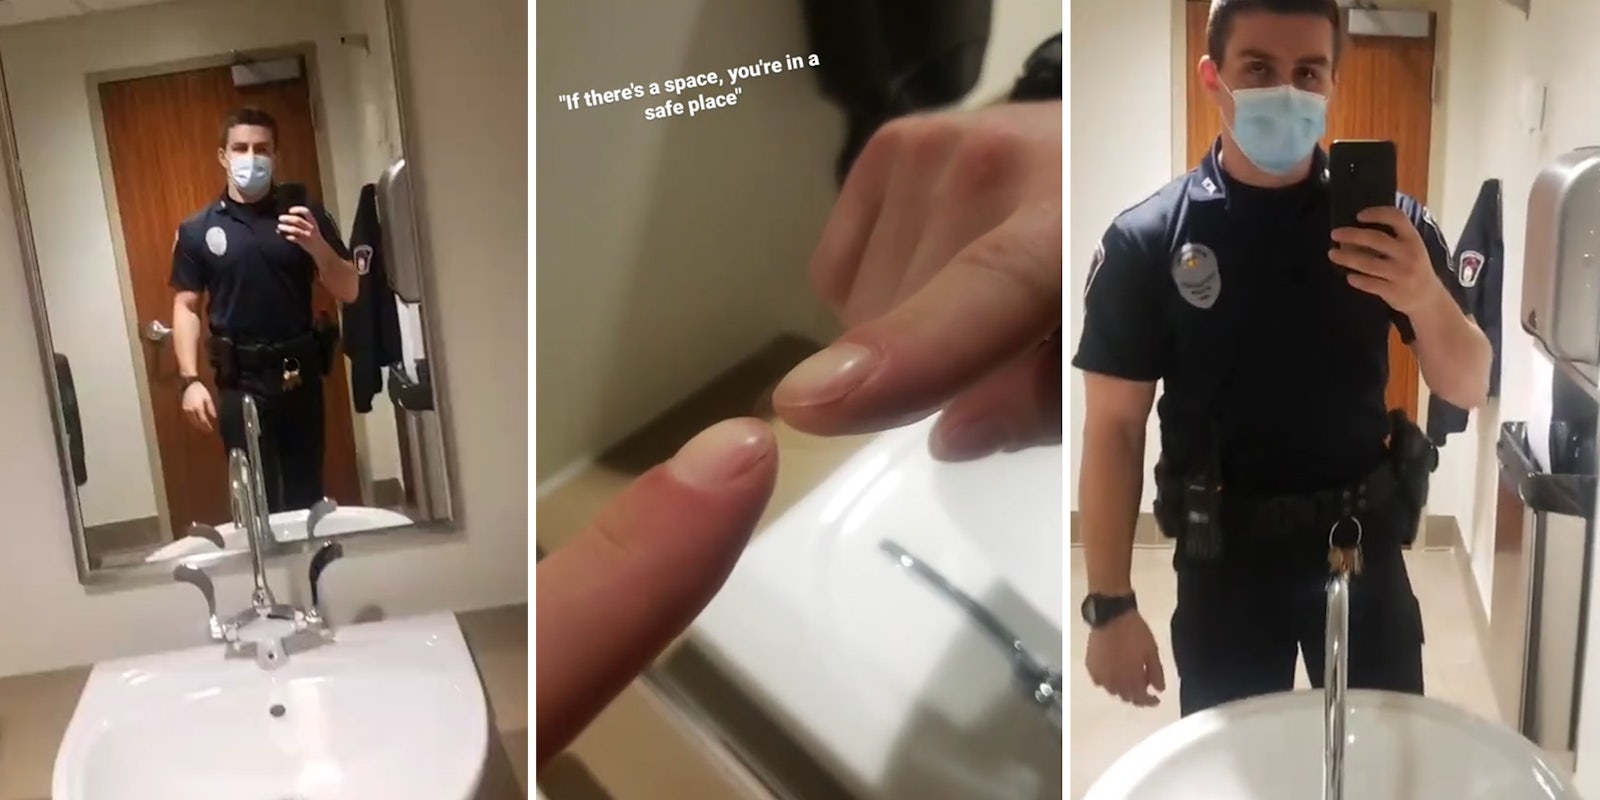 Police officer shows how to tell if you’re being watched via two way mirror